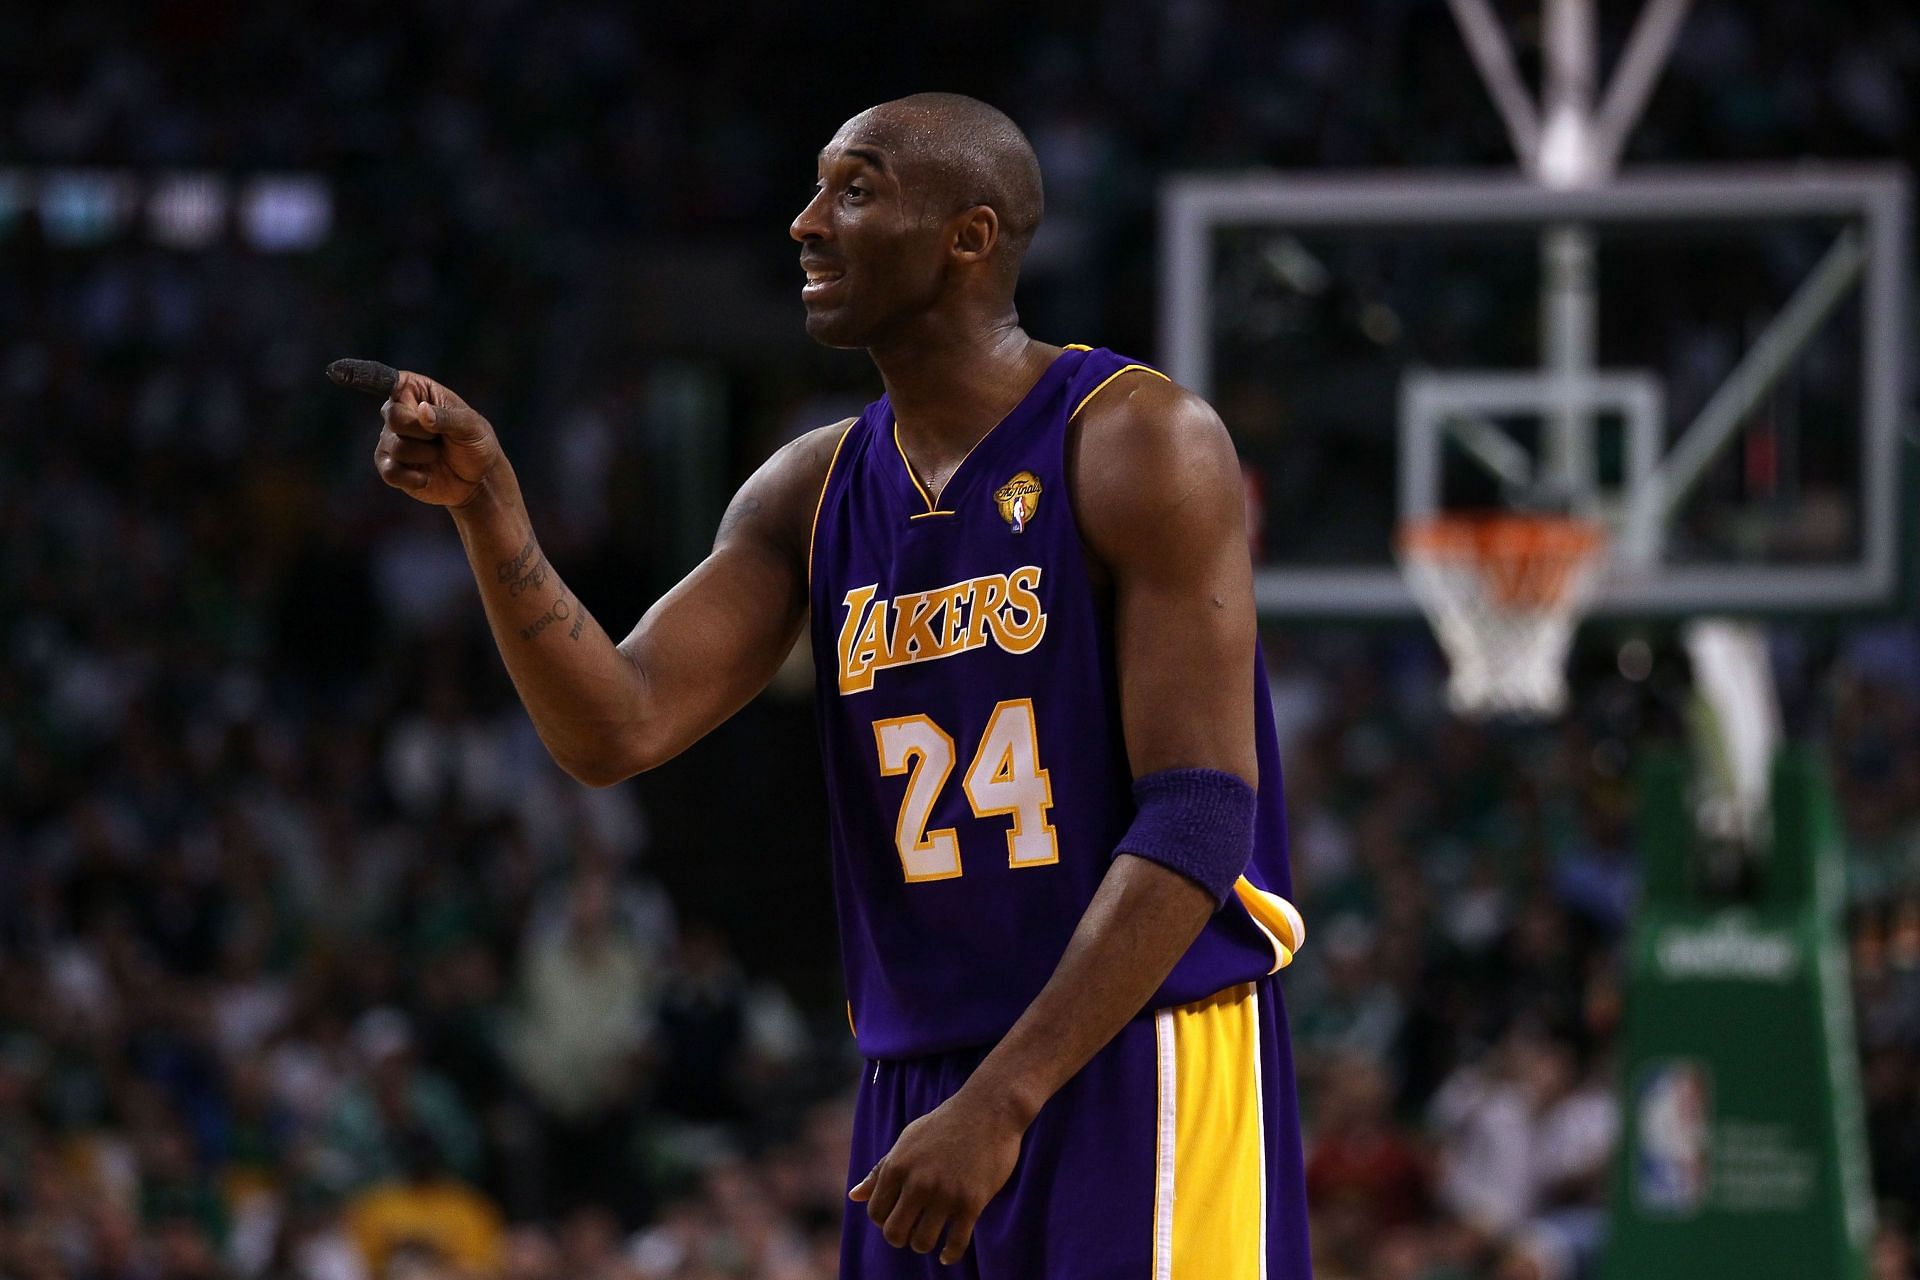 PHILLY'S WILT AND KOBE AT THE TOP: CHECK OUT BRYANT'S 81-POINTER